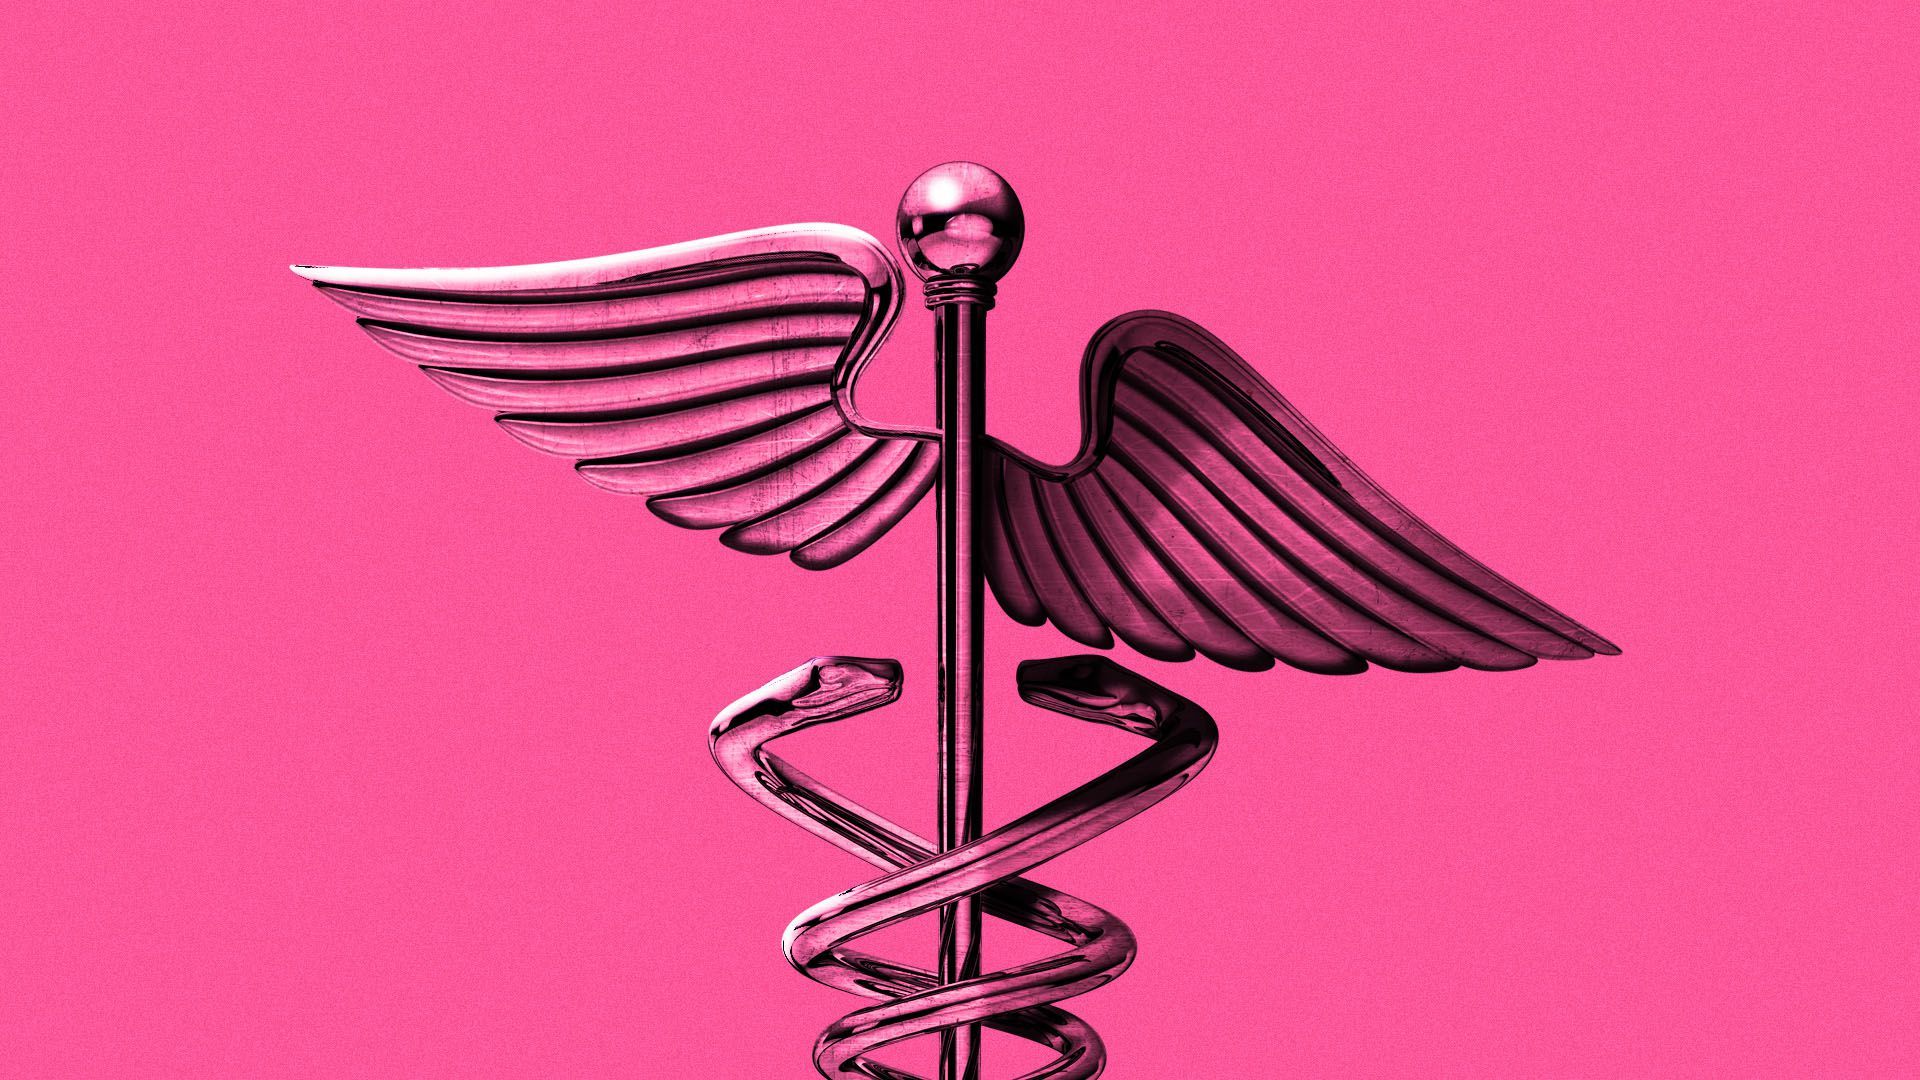 Illustration of a caduceus with uneven wings.